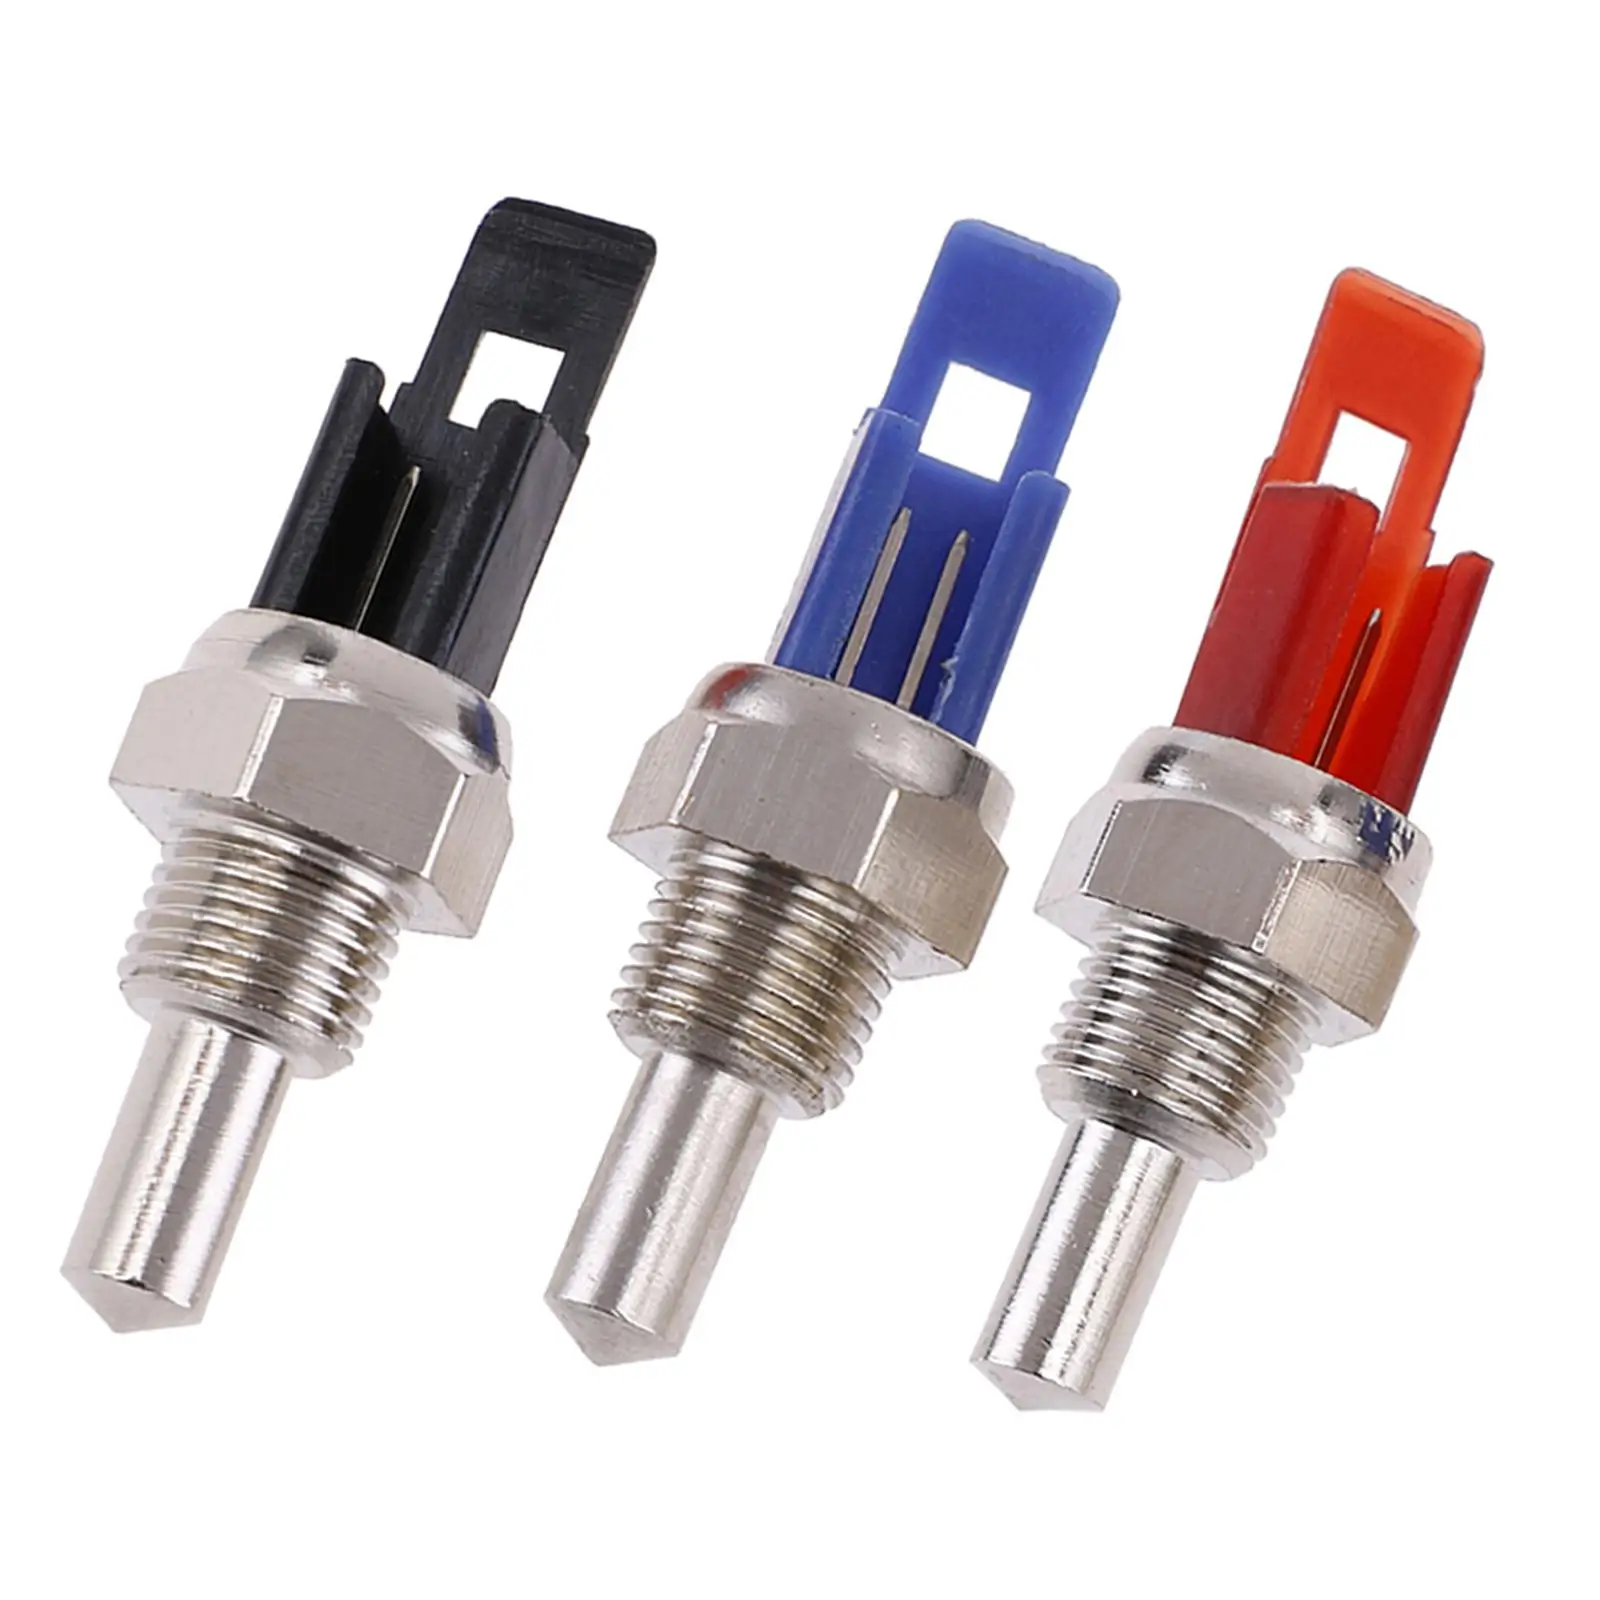 Ntc Temperature Sensor Gas Water Heater Spare Parts High professional for Water Heater Stoves Gas Heater Accessories